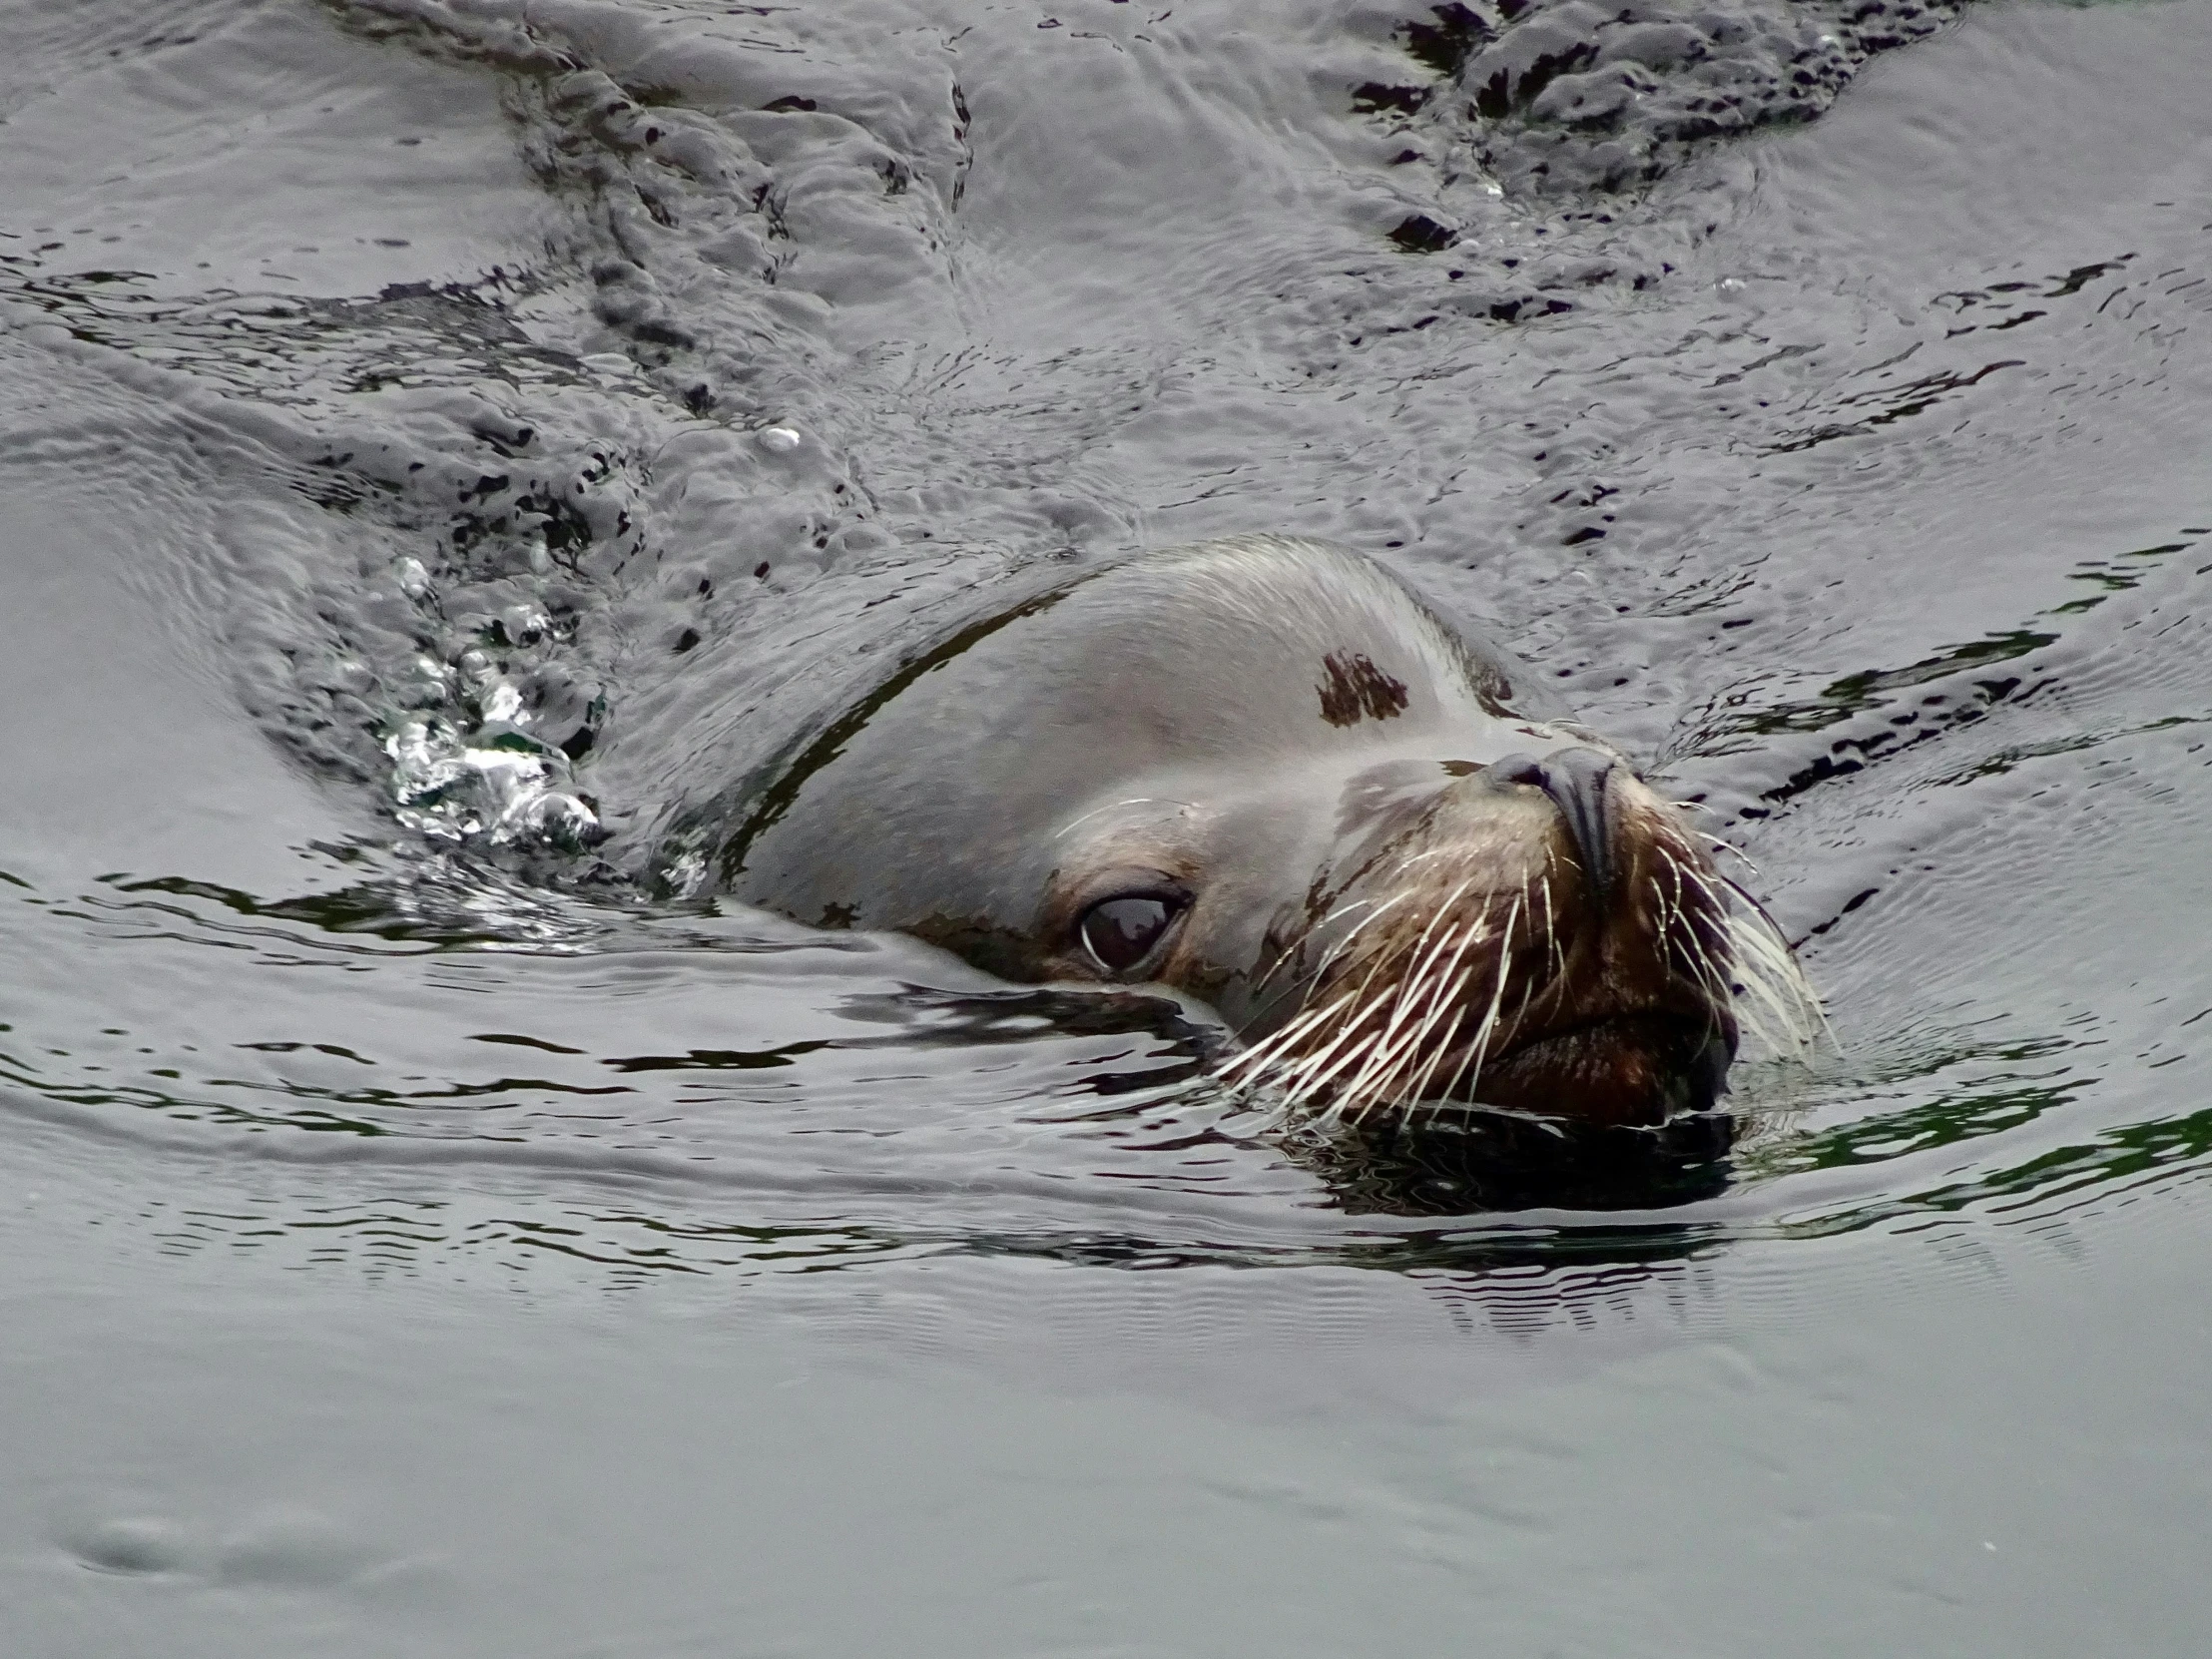 a seal is swimming on the water with its mouth open